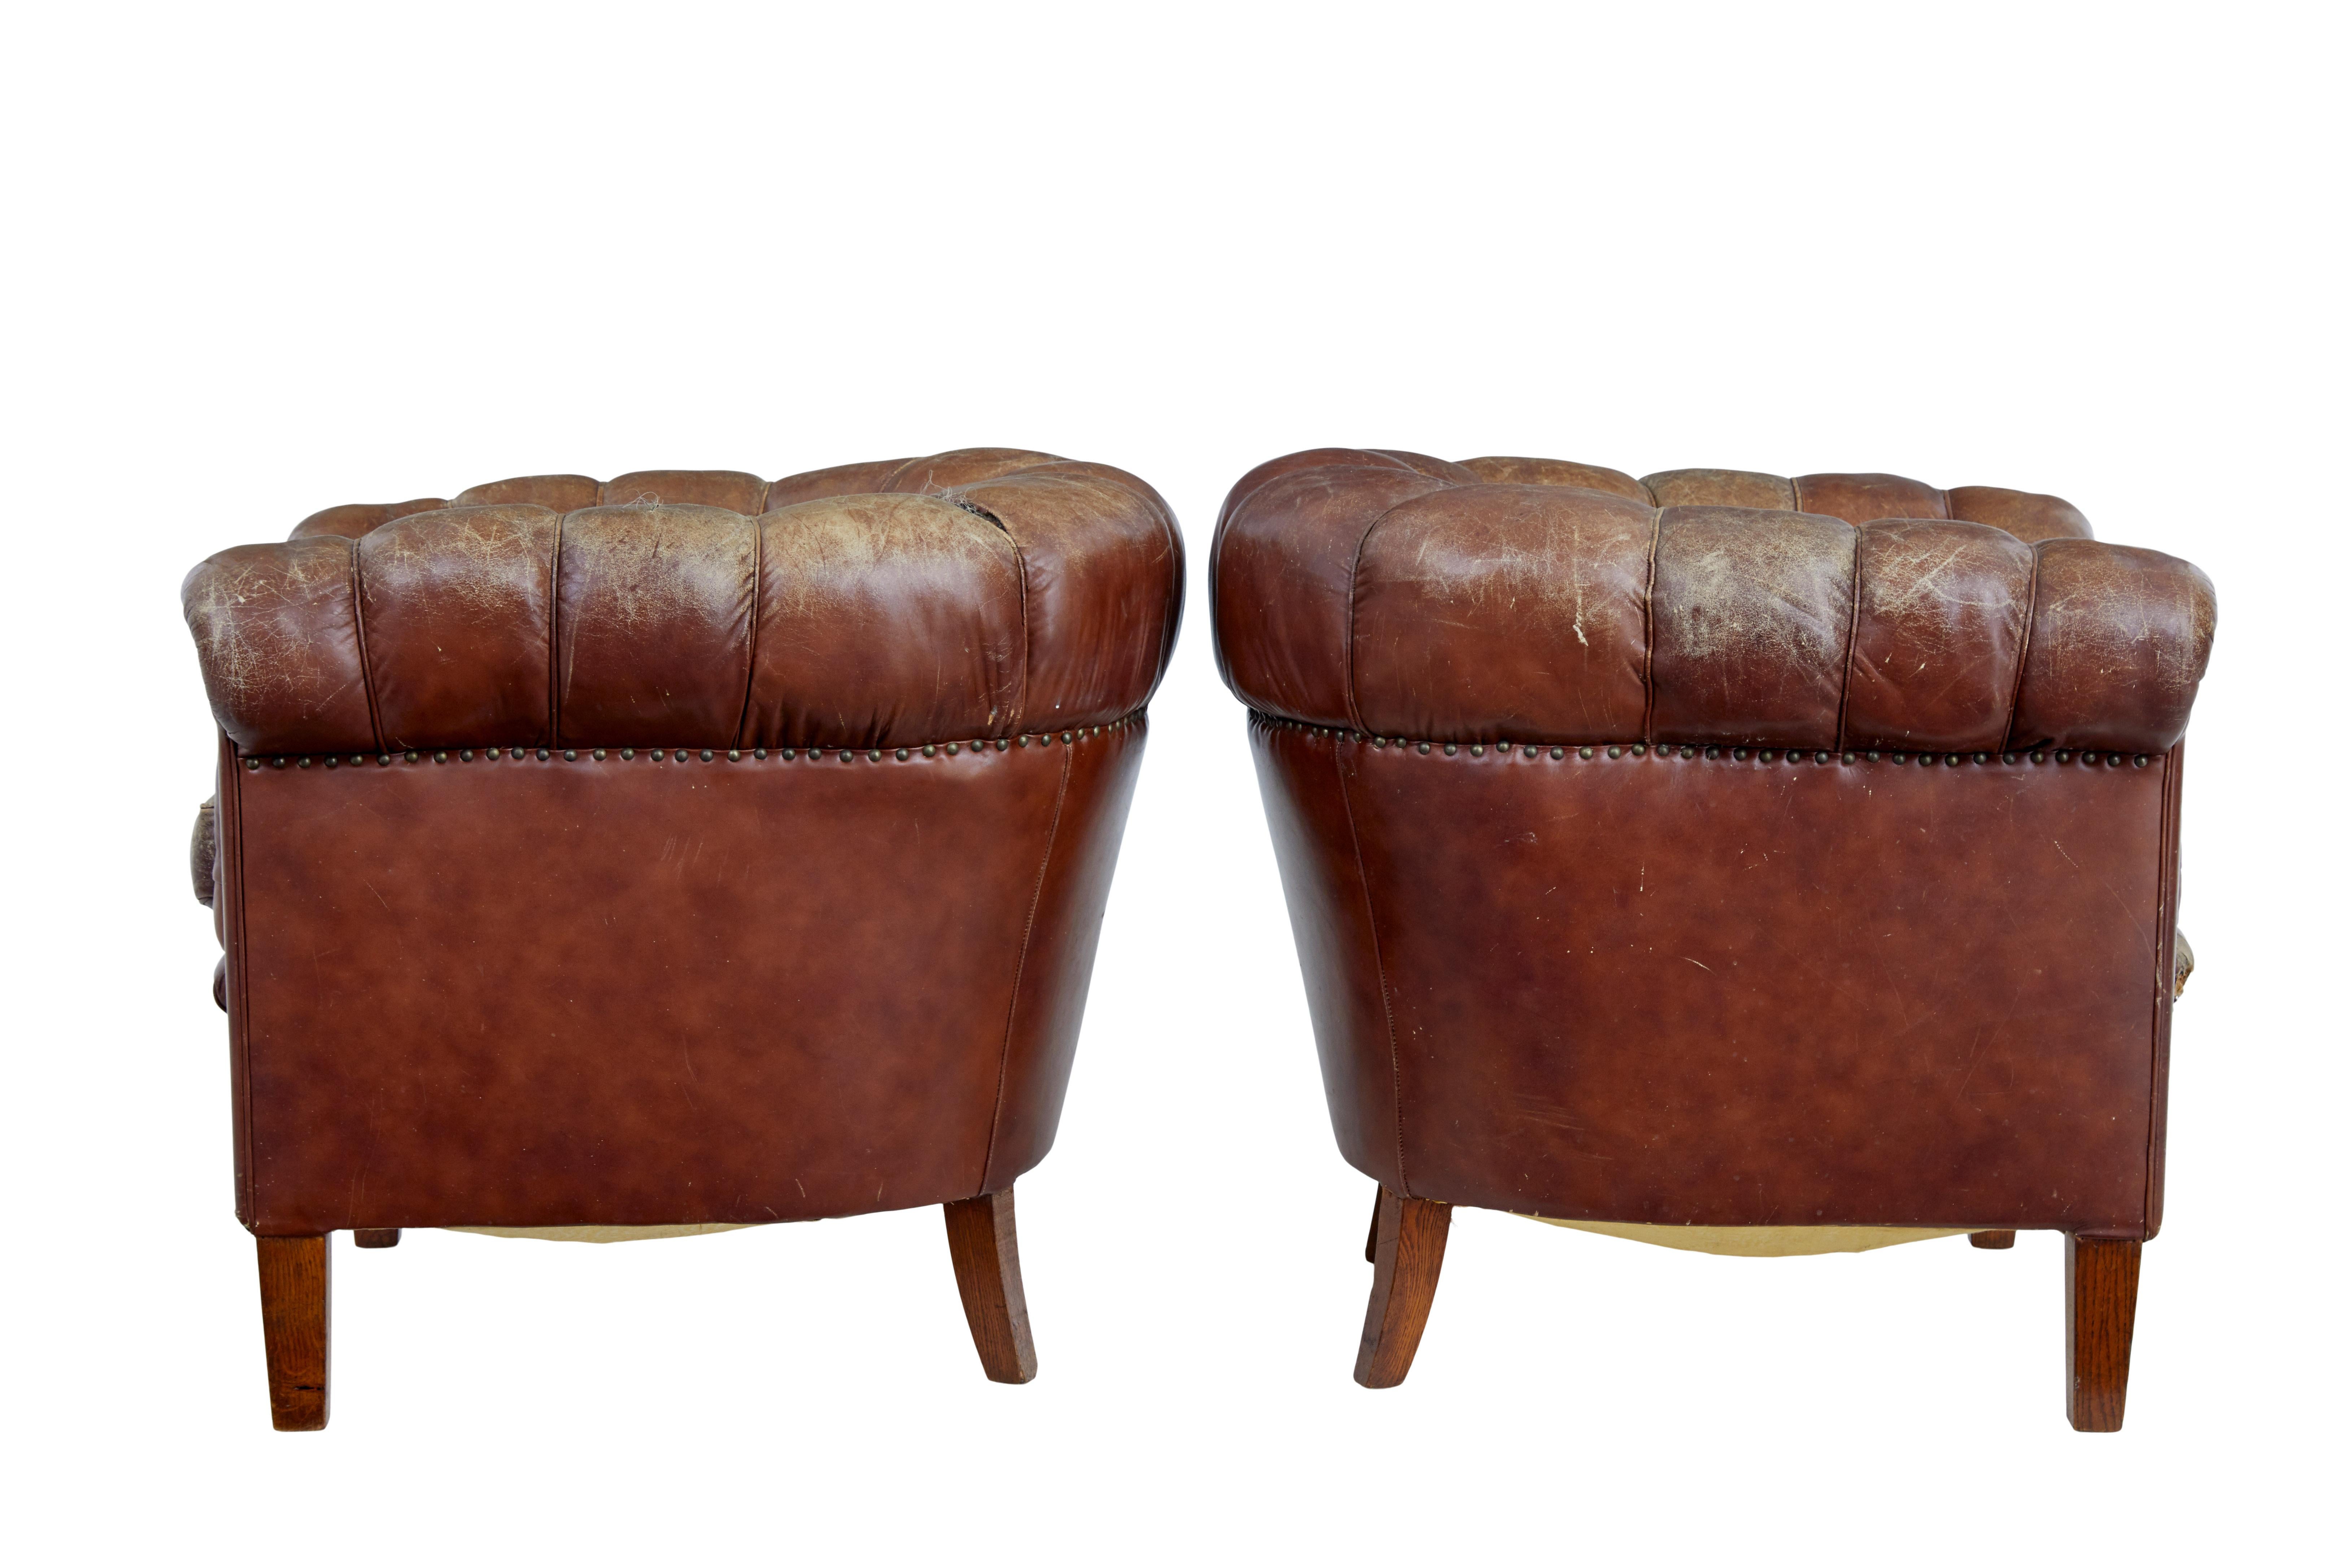 Pair of 20th century leather lounge armchairs circa 1920.

Very comfortable pair of 1920's leather button back armchairs. Over stuffed roll top arms, with seperate seat cushion. Each standing on 4 tapering oak legs.

Obvious fading, splits and